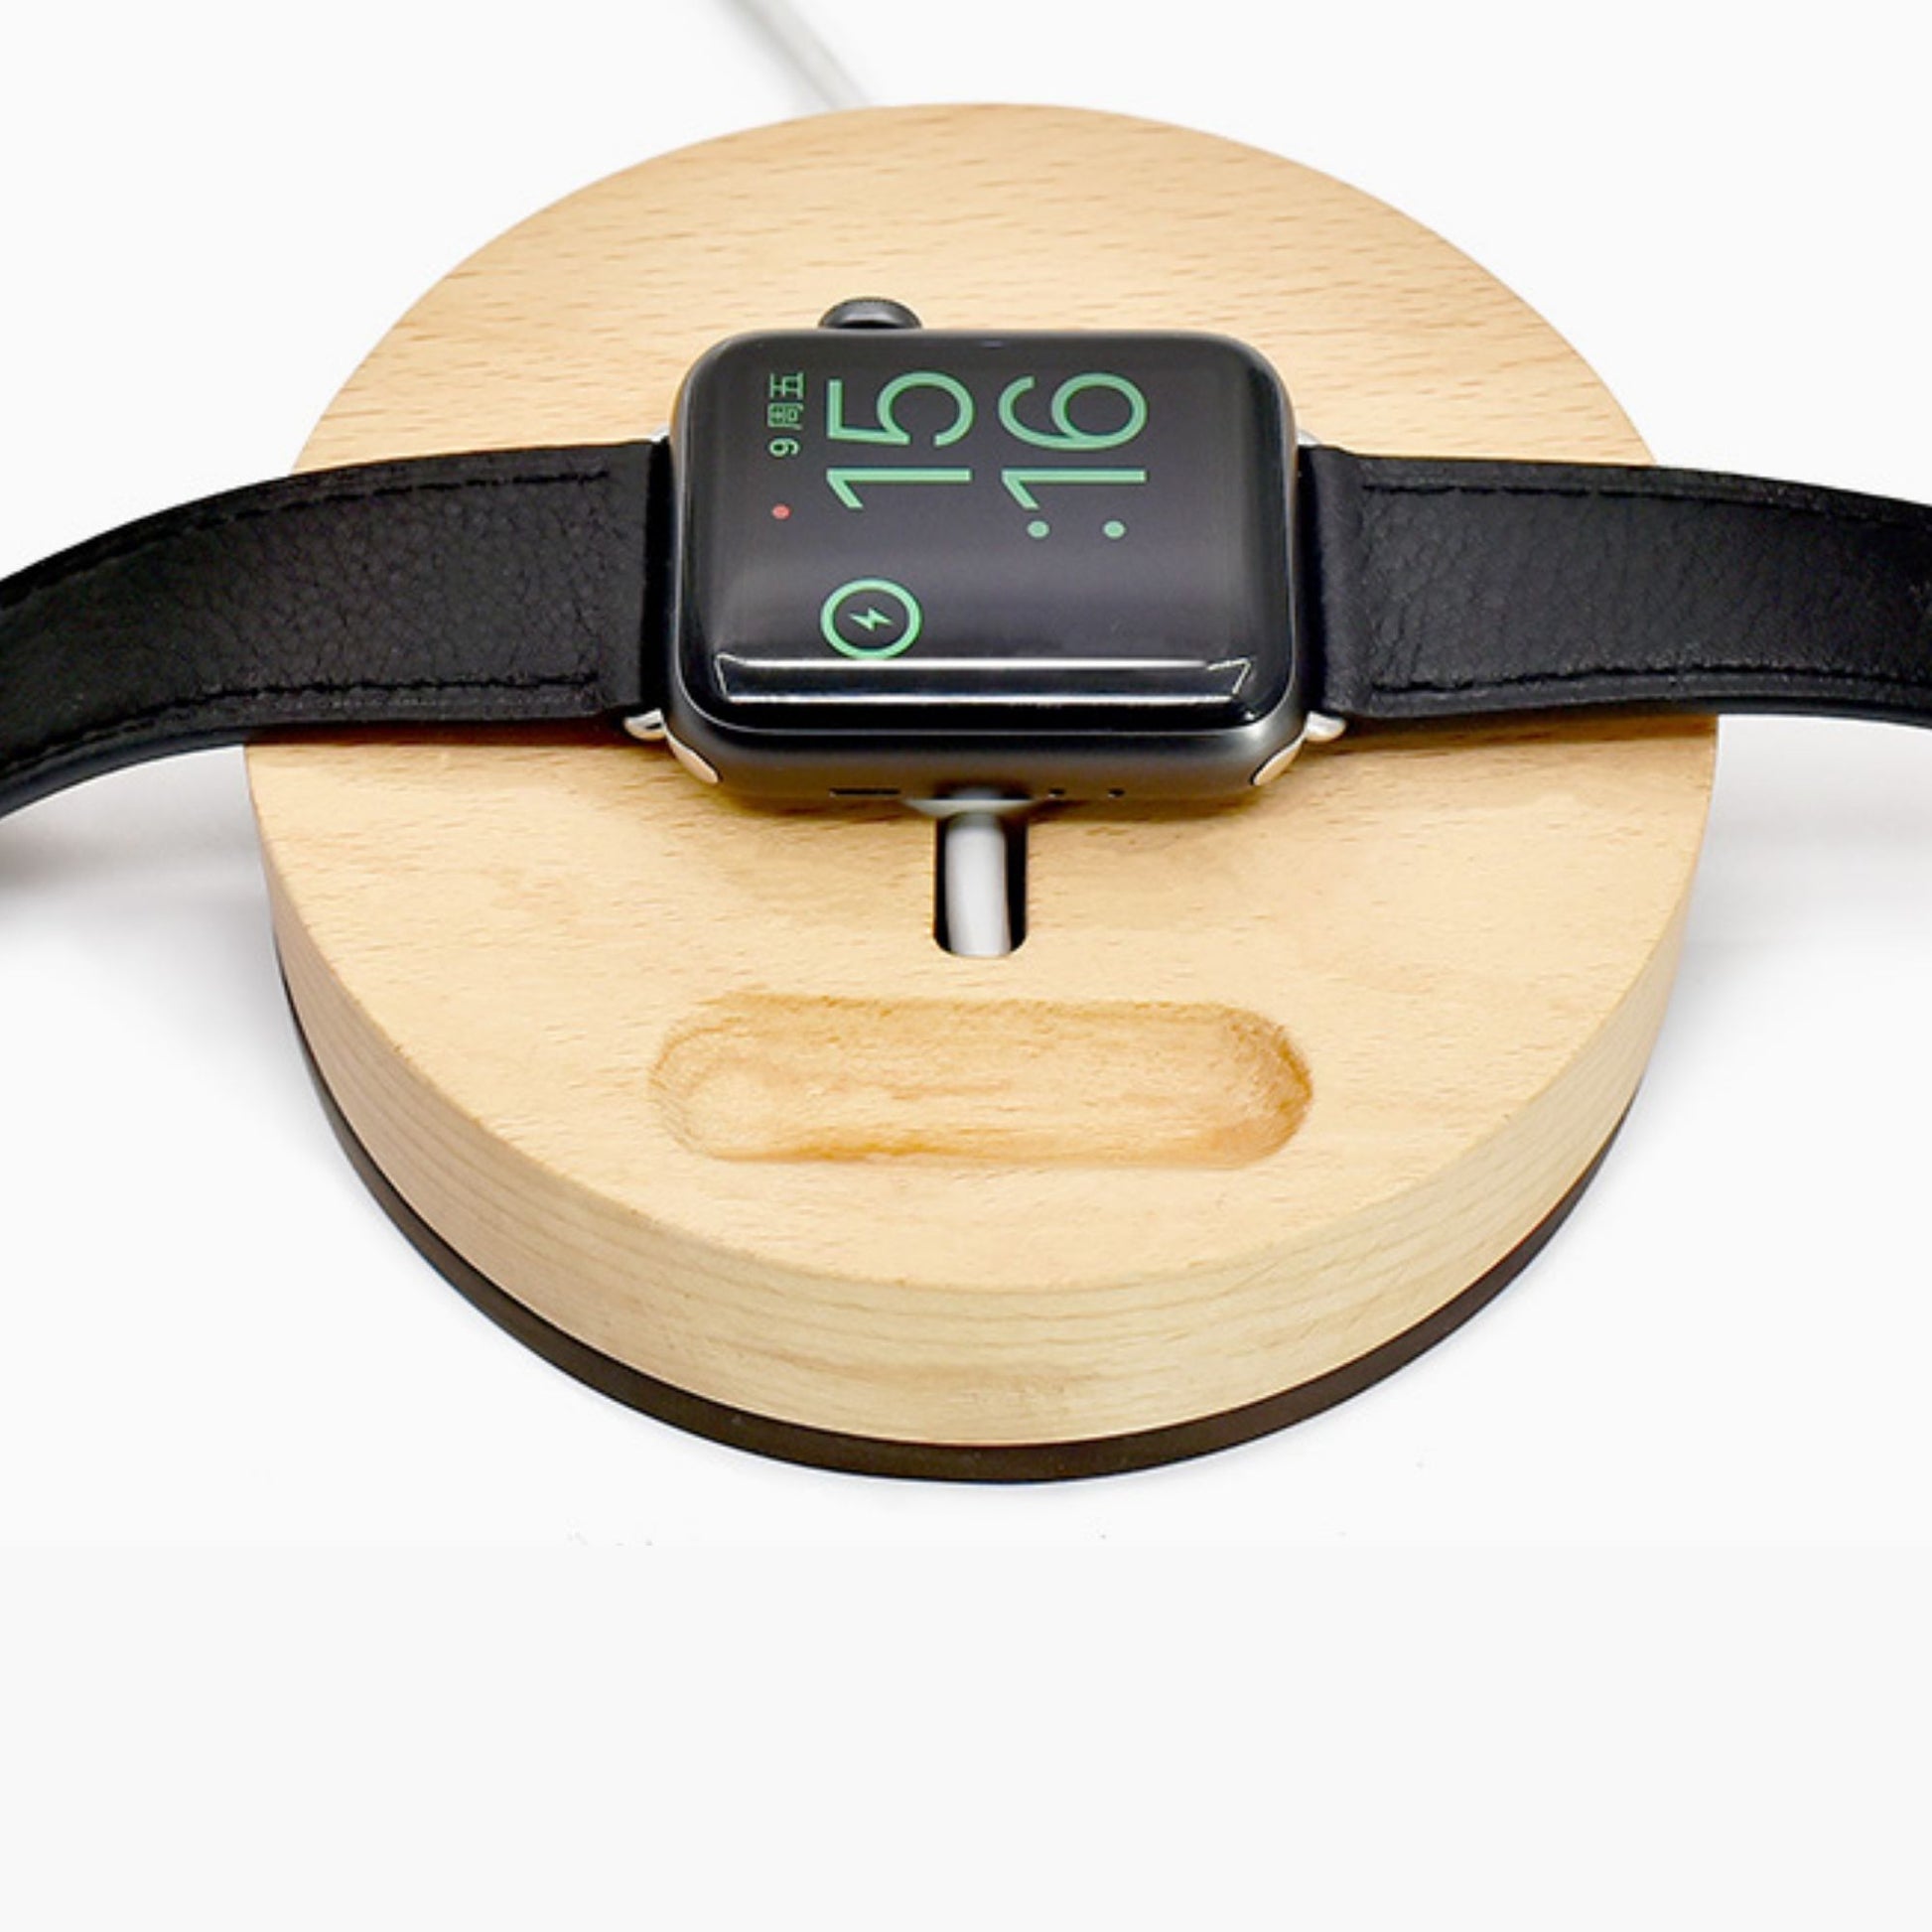 2 in 1 Magsafe Charger Station for iPhone and Watch Dark walnut wood and light birch wood